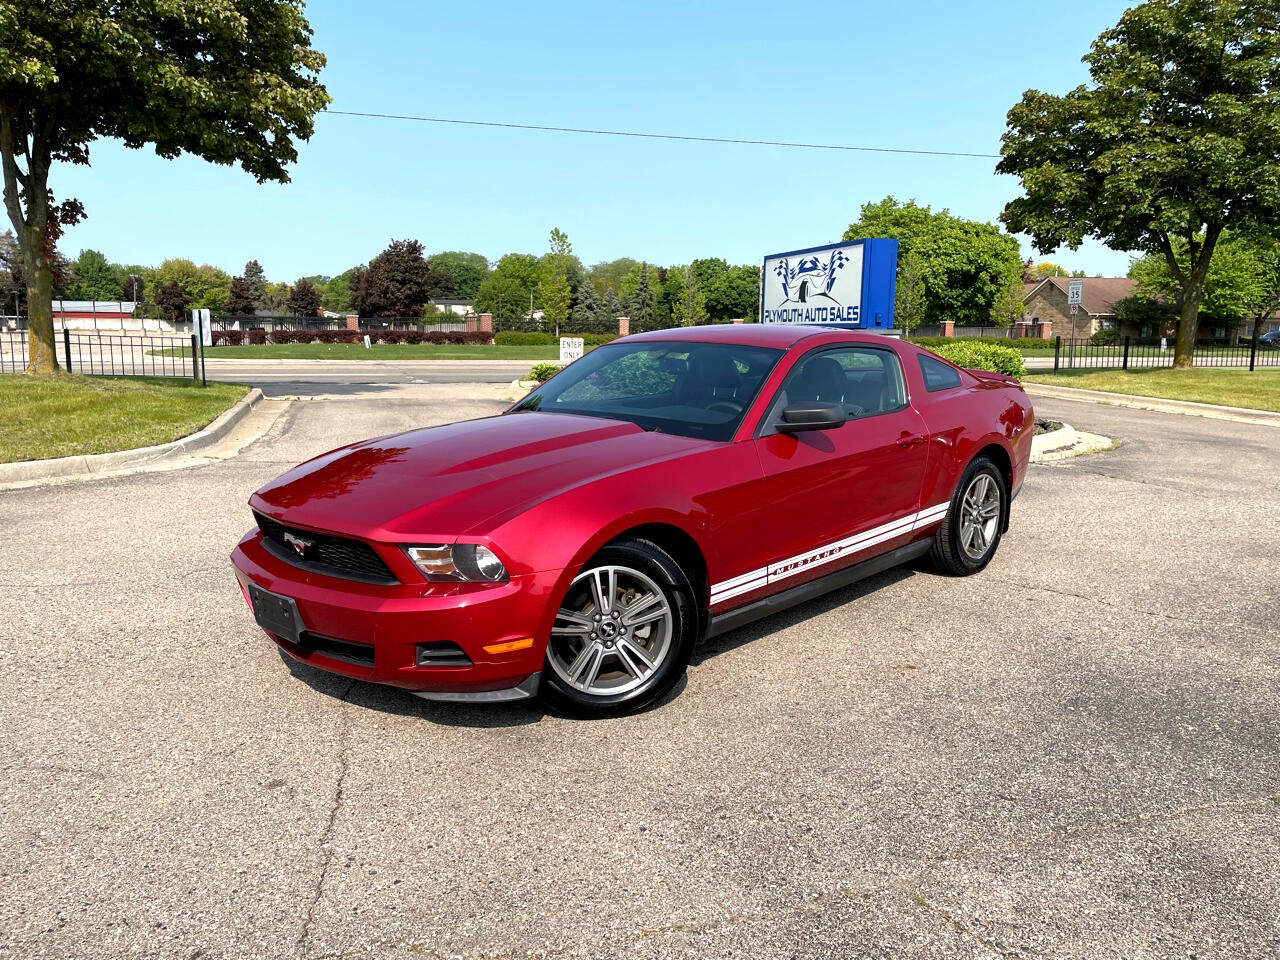 Ford Mustang V6 Premium Coupe 2010